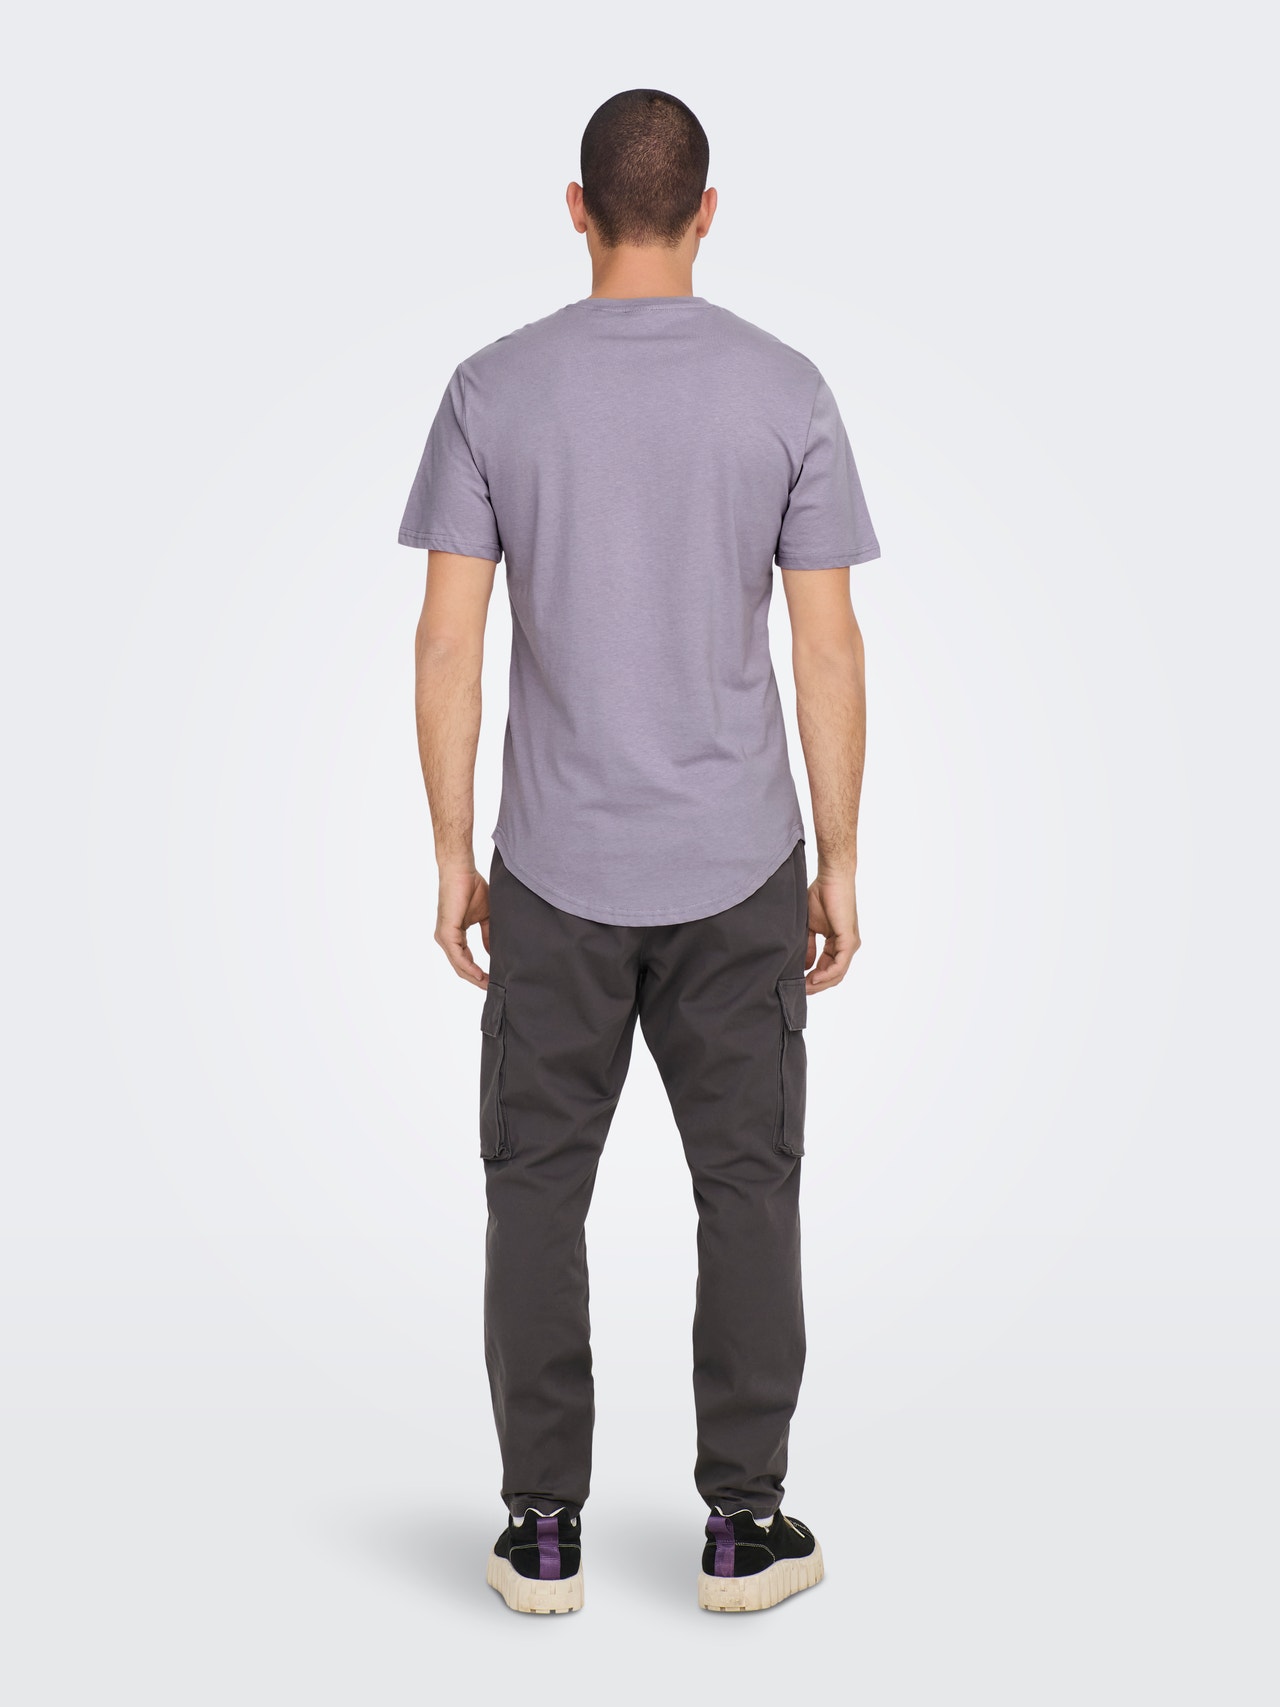 ONLY & SONS Long Line Fit Round Neck T-Shirt -Purple Ash - 22002973